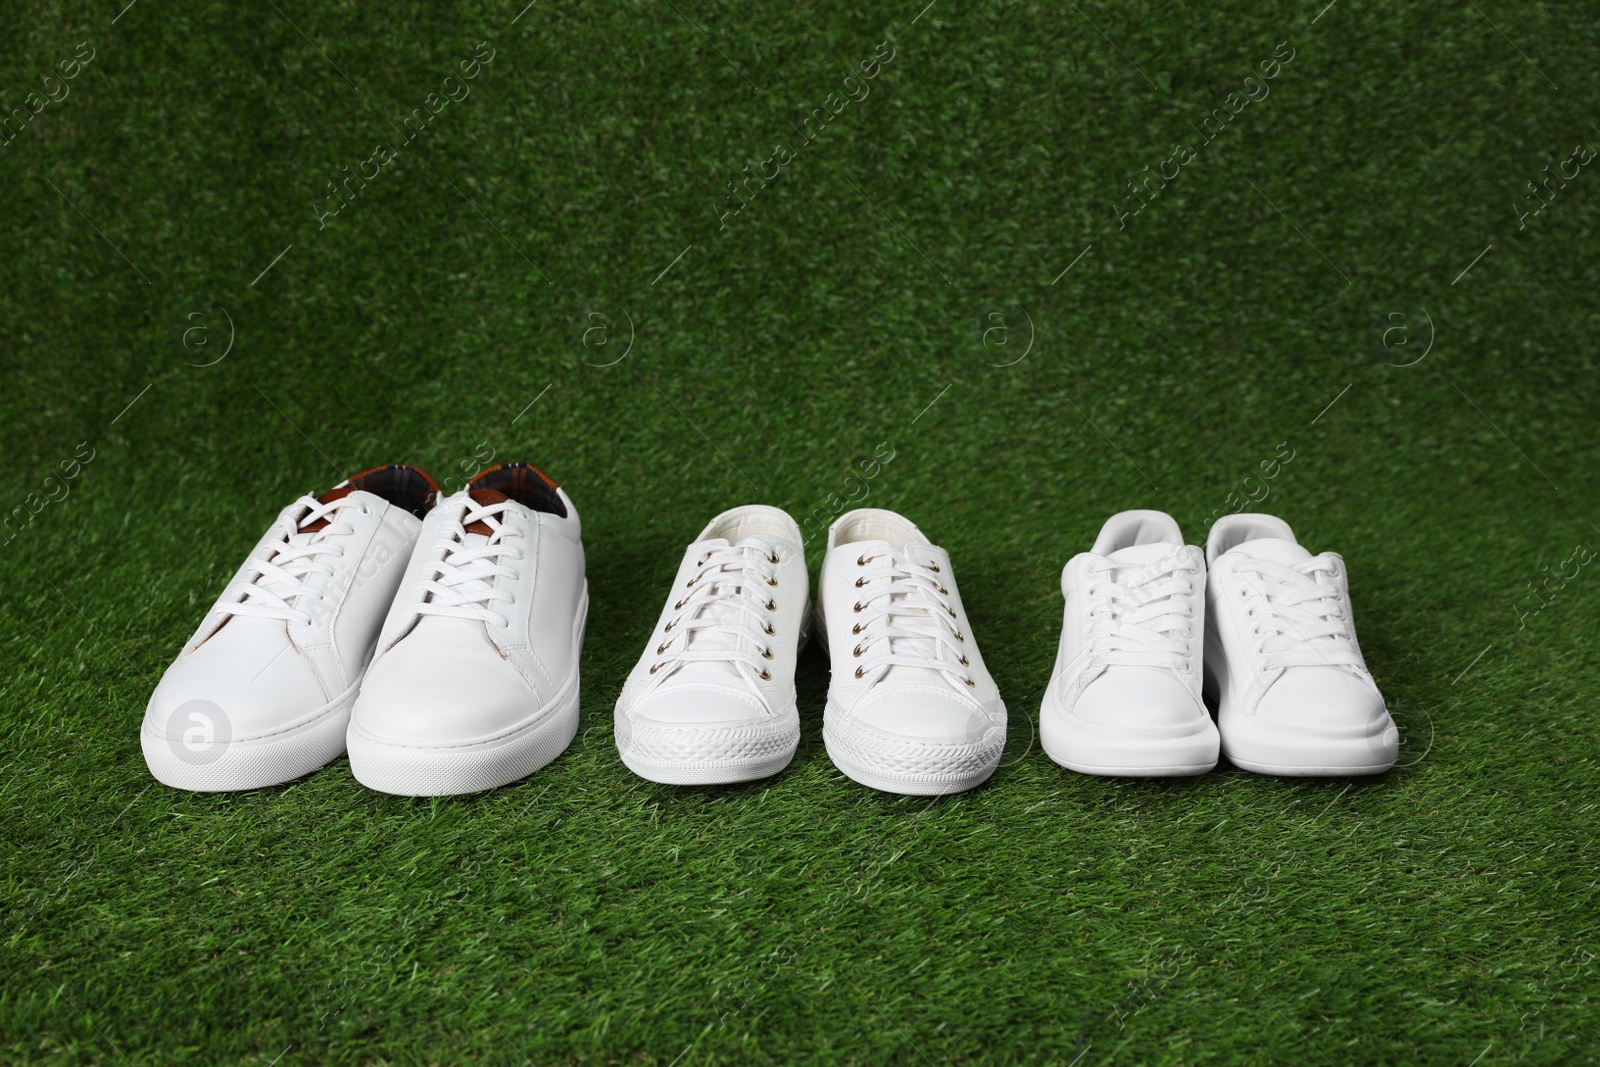 Photo of Stylish sports shoes for all family members on green grass